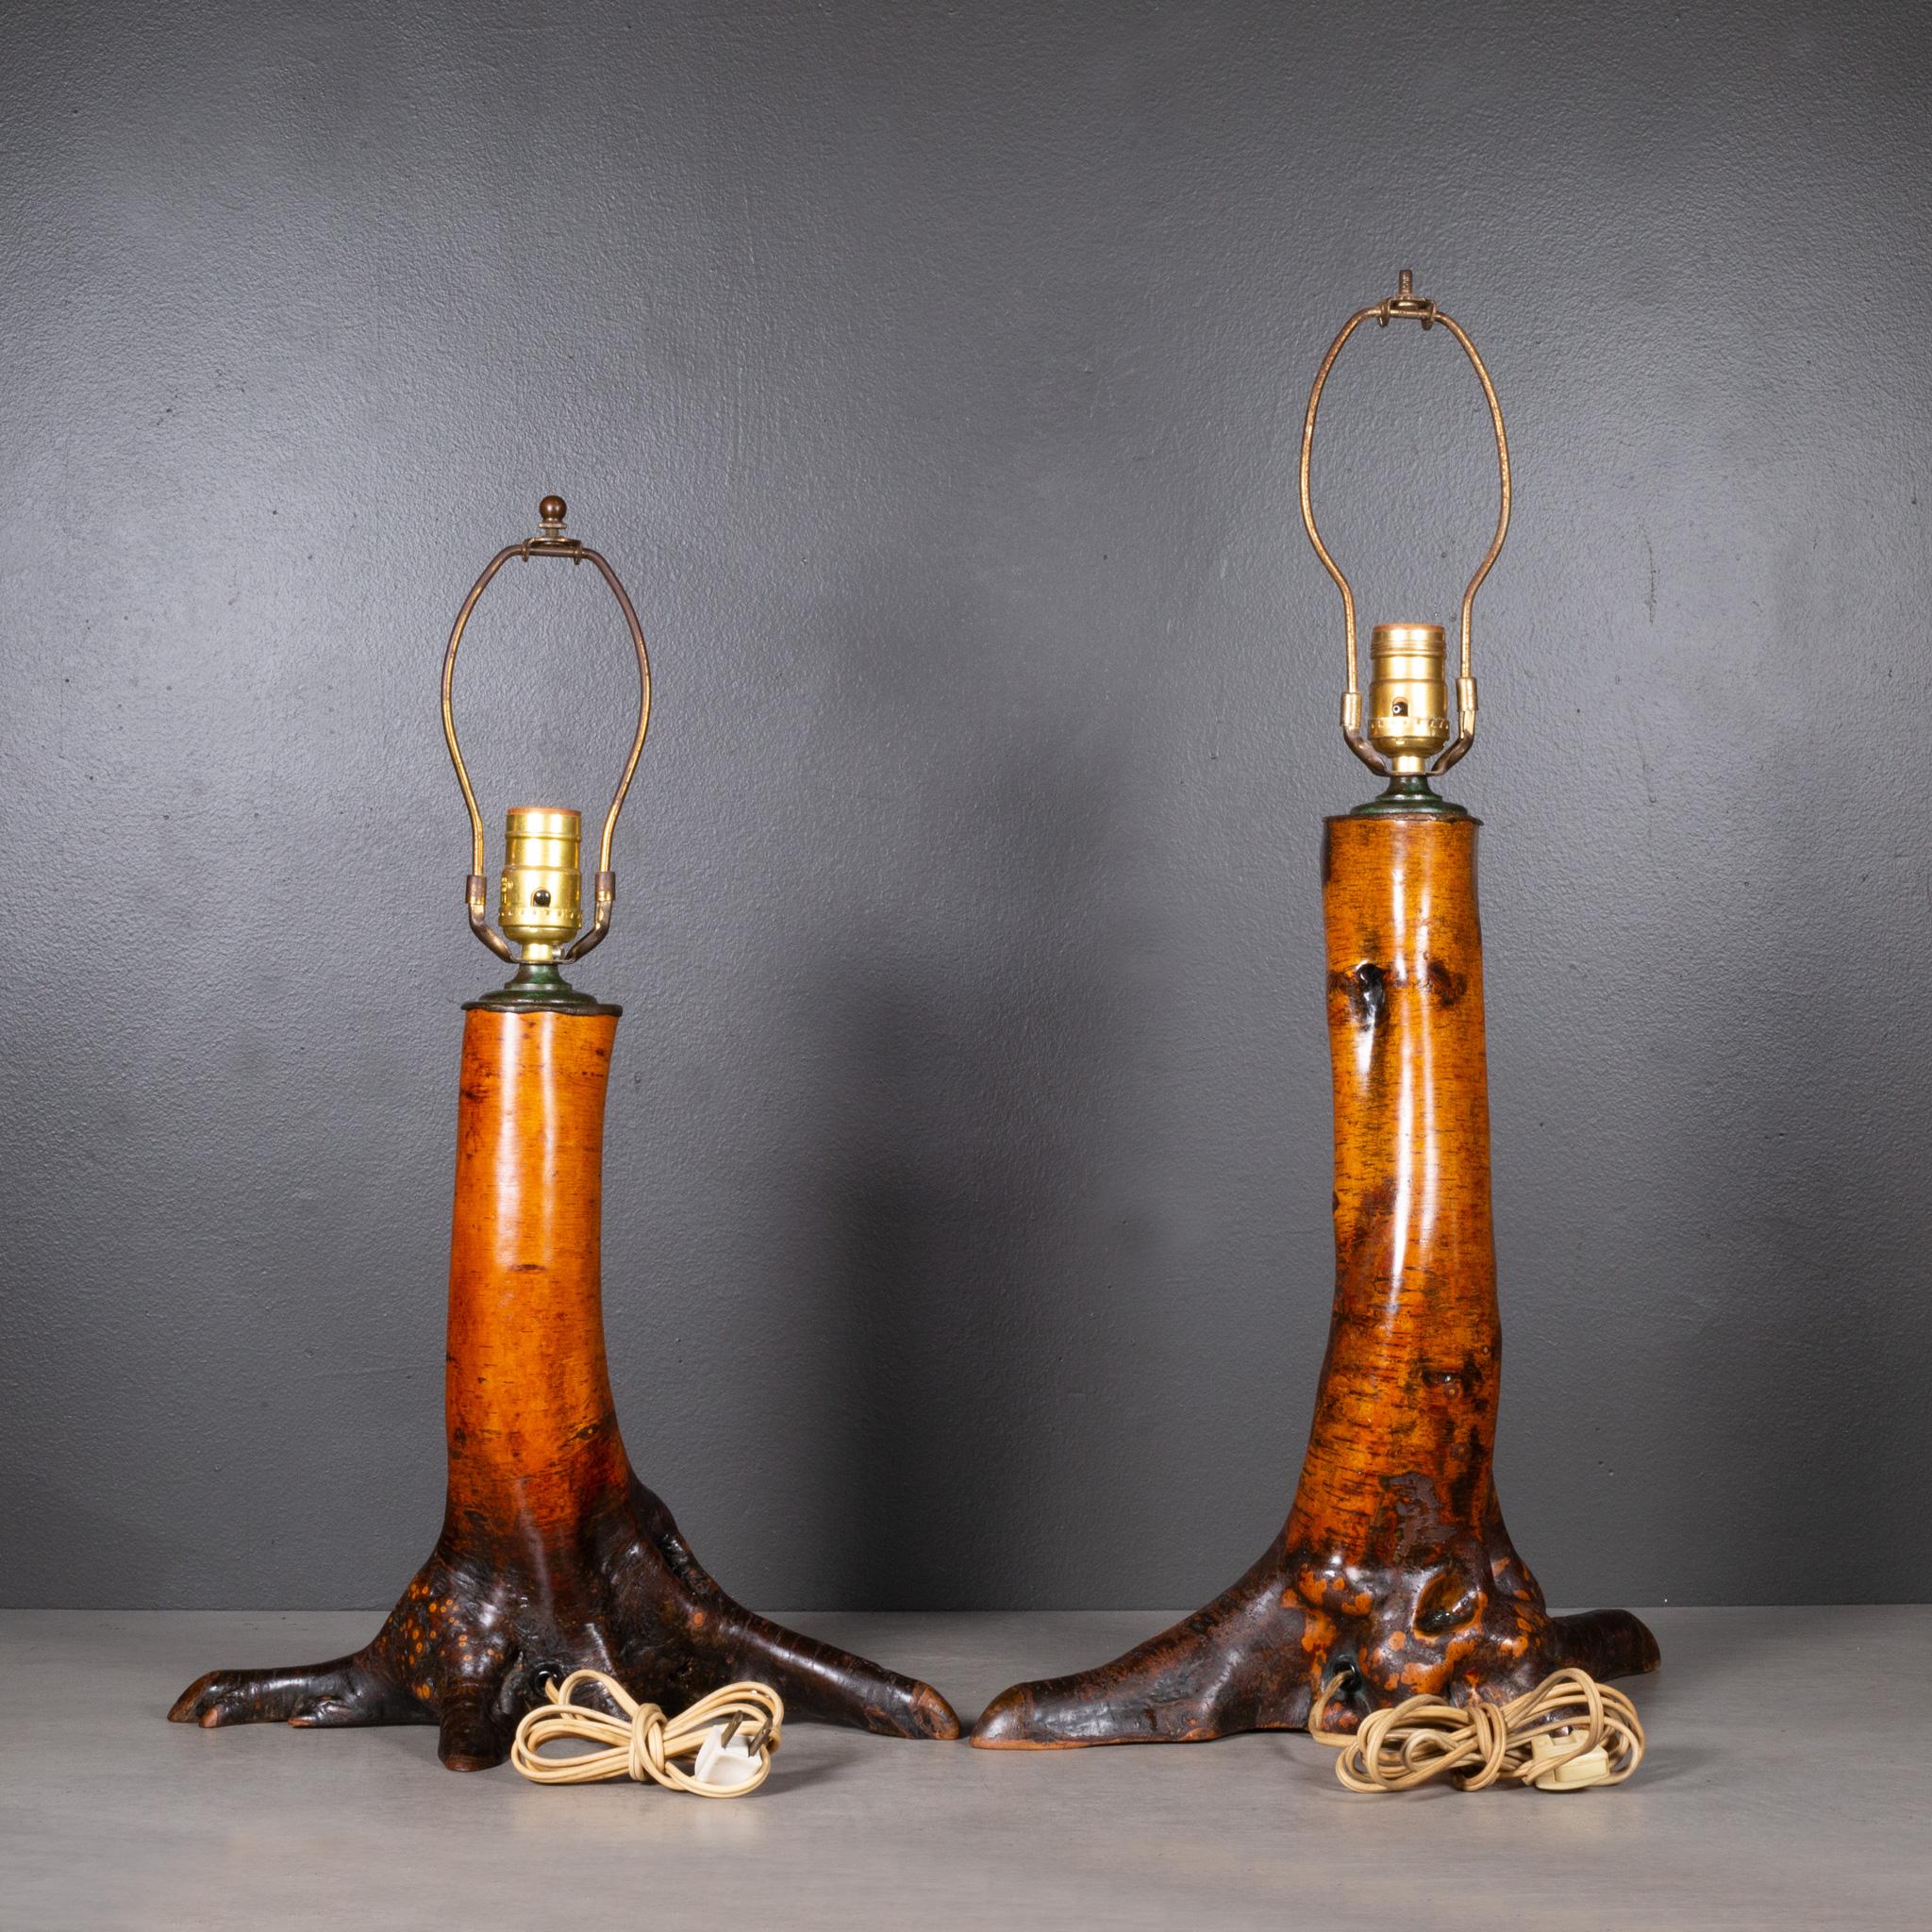 American Early 20th c. Birch Trunk Lamps with Bronze Collars c.1920-1940 For Sale